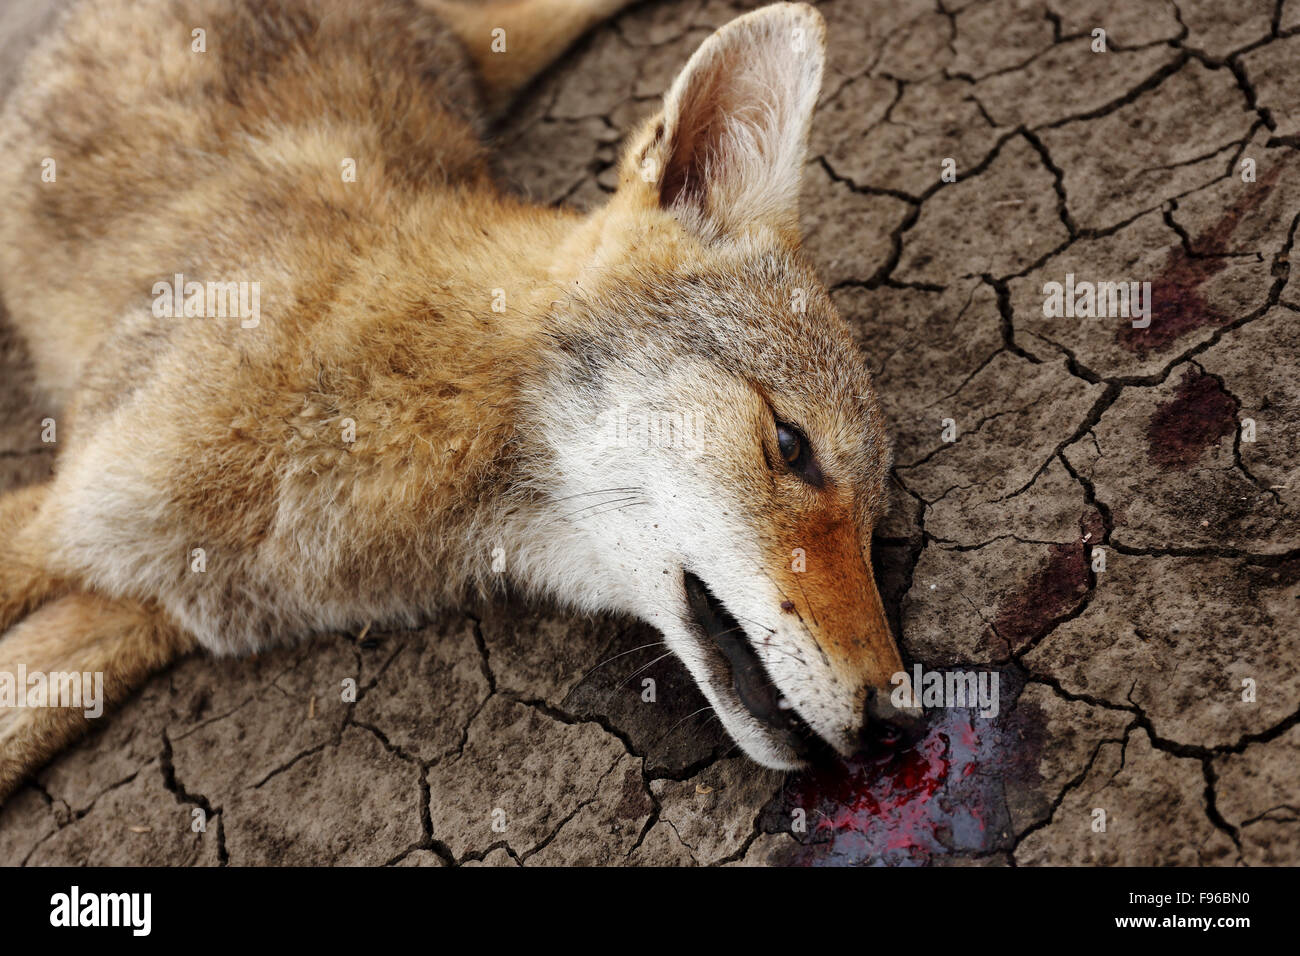 dead coyote, Canis latrans,Canidae, Canids,southern Saskatchewan road side, blood, Canada, prairie road side Stock Photo